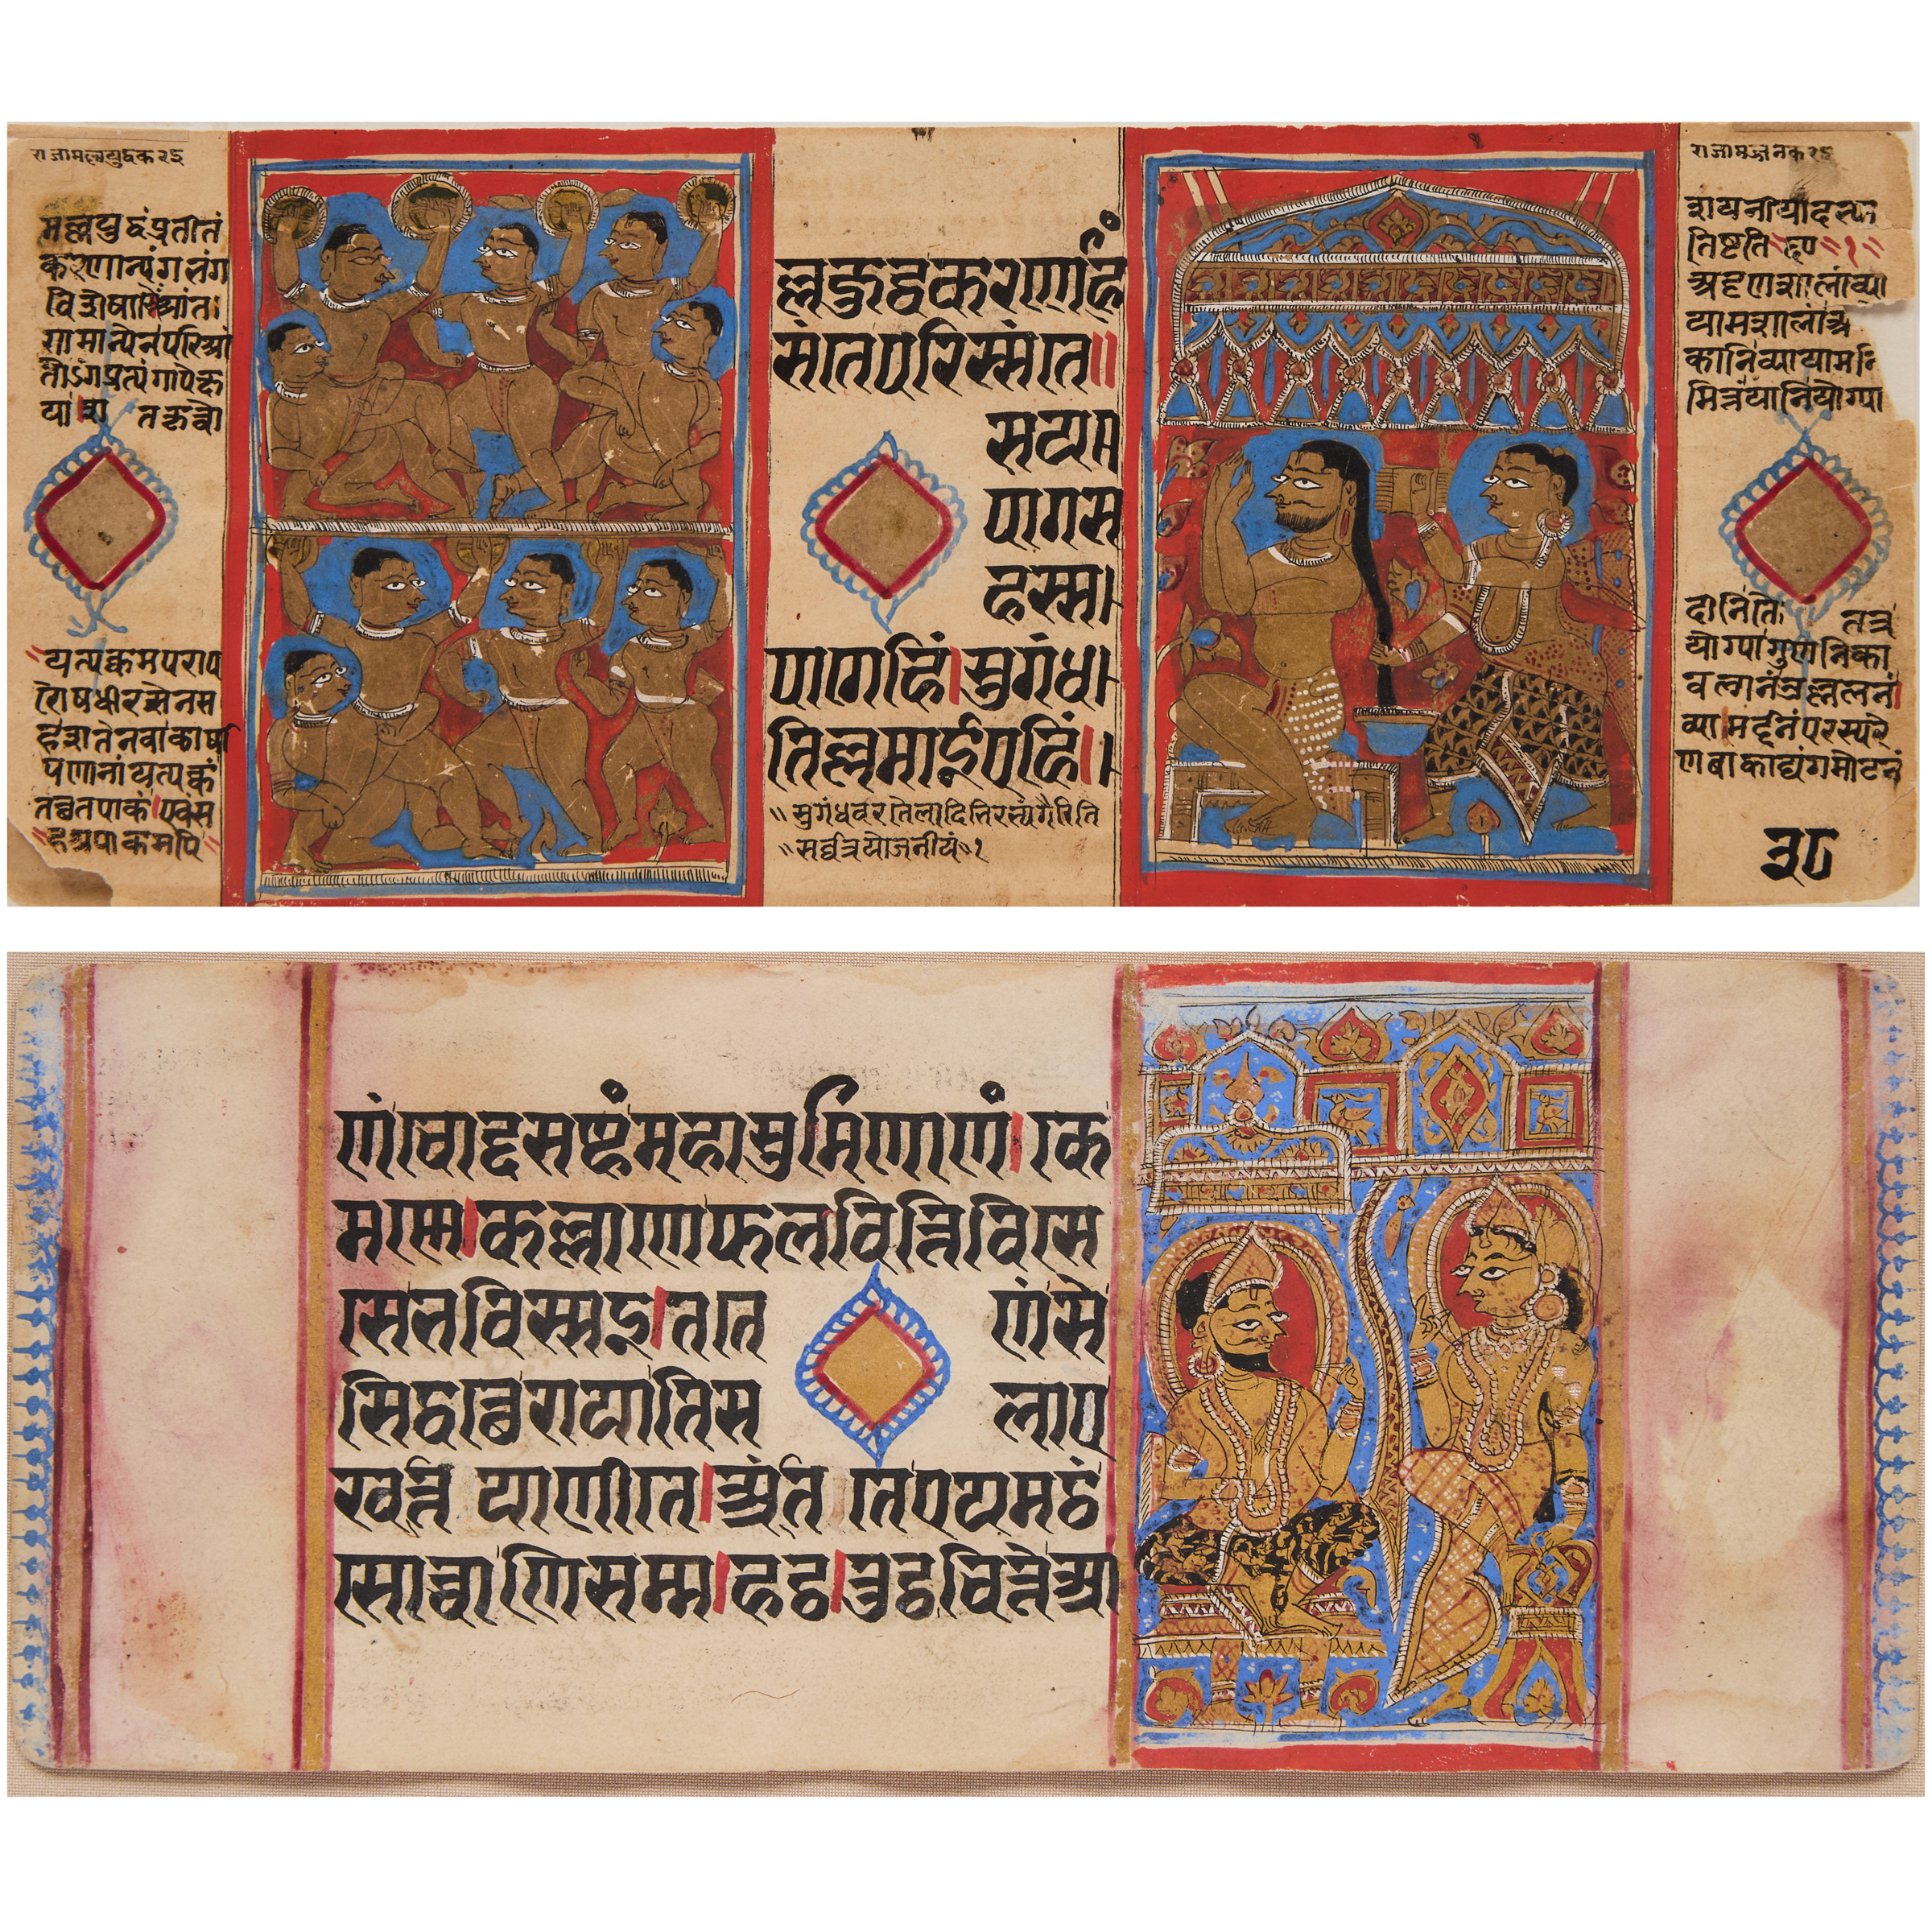 Two Illustrated Folios from the